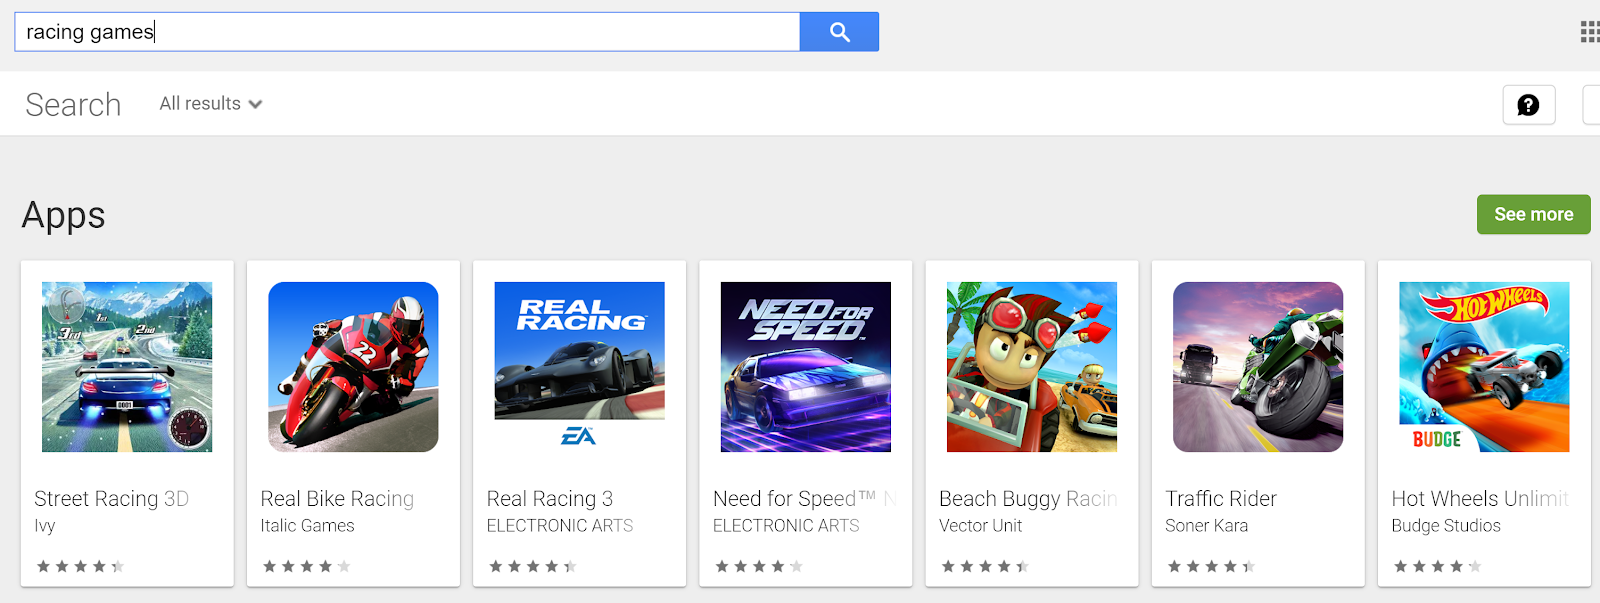 Google Play Store tags for racing games.